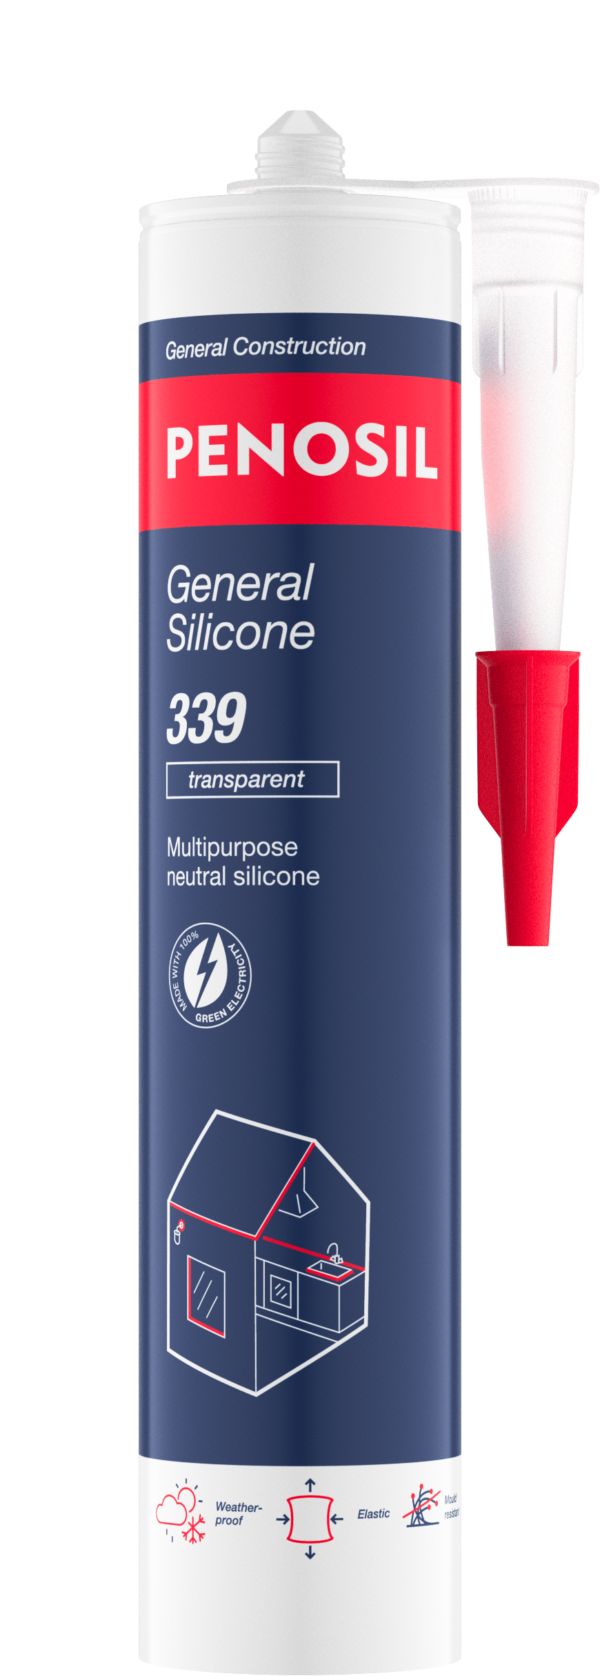 Penosil General Silicone 339 & 339c neutral silicone for general construction works